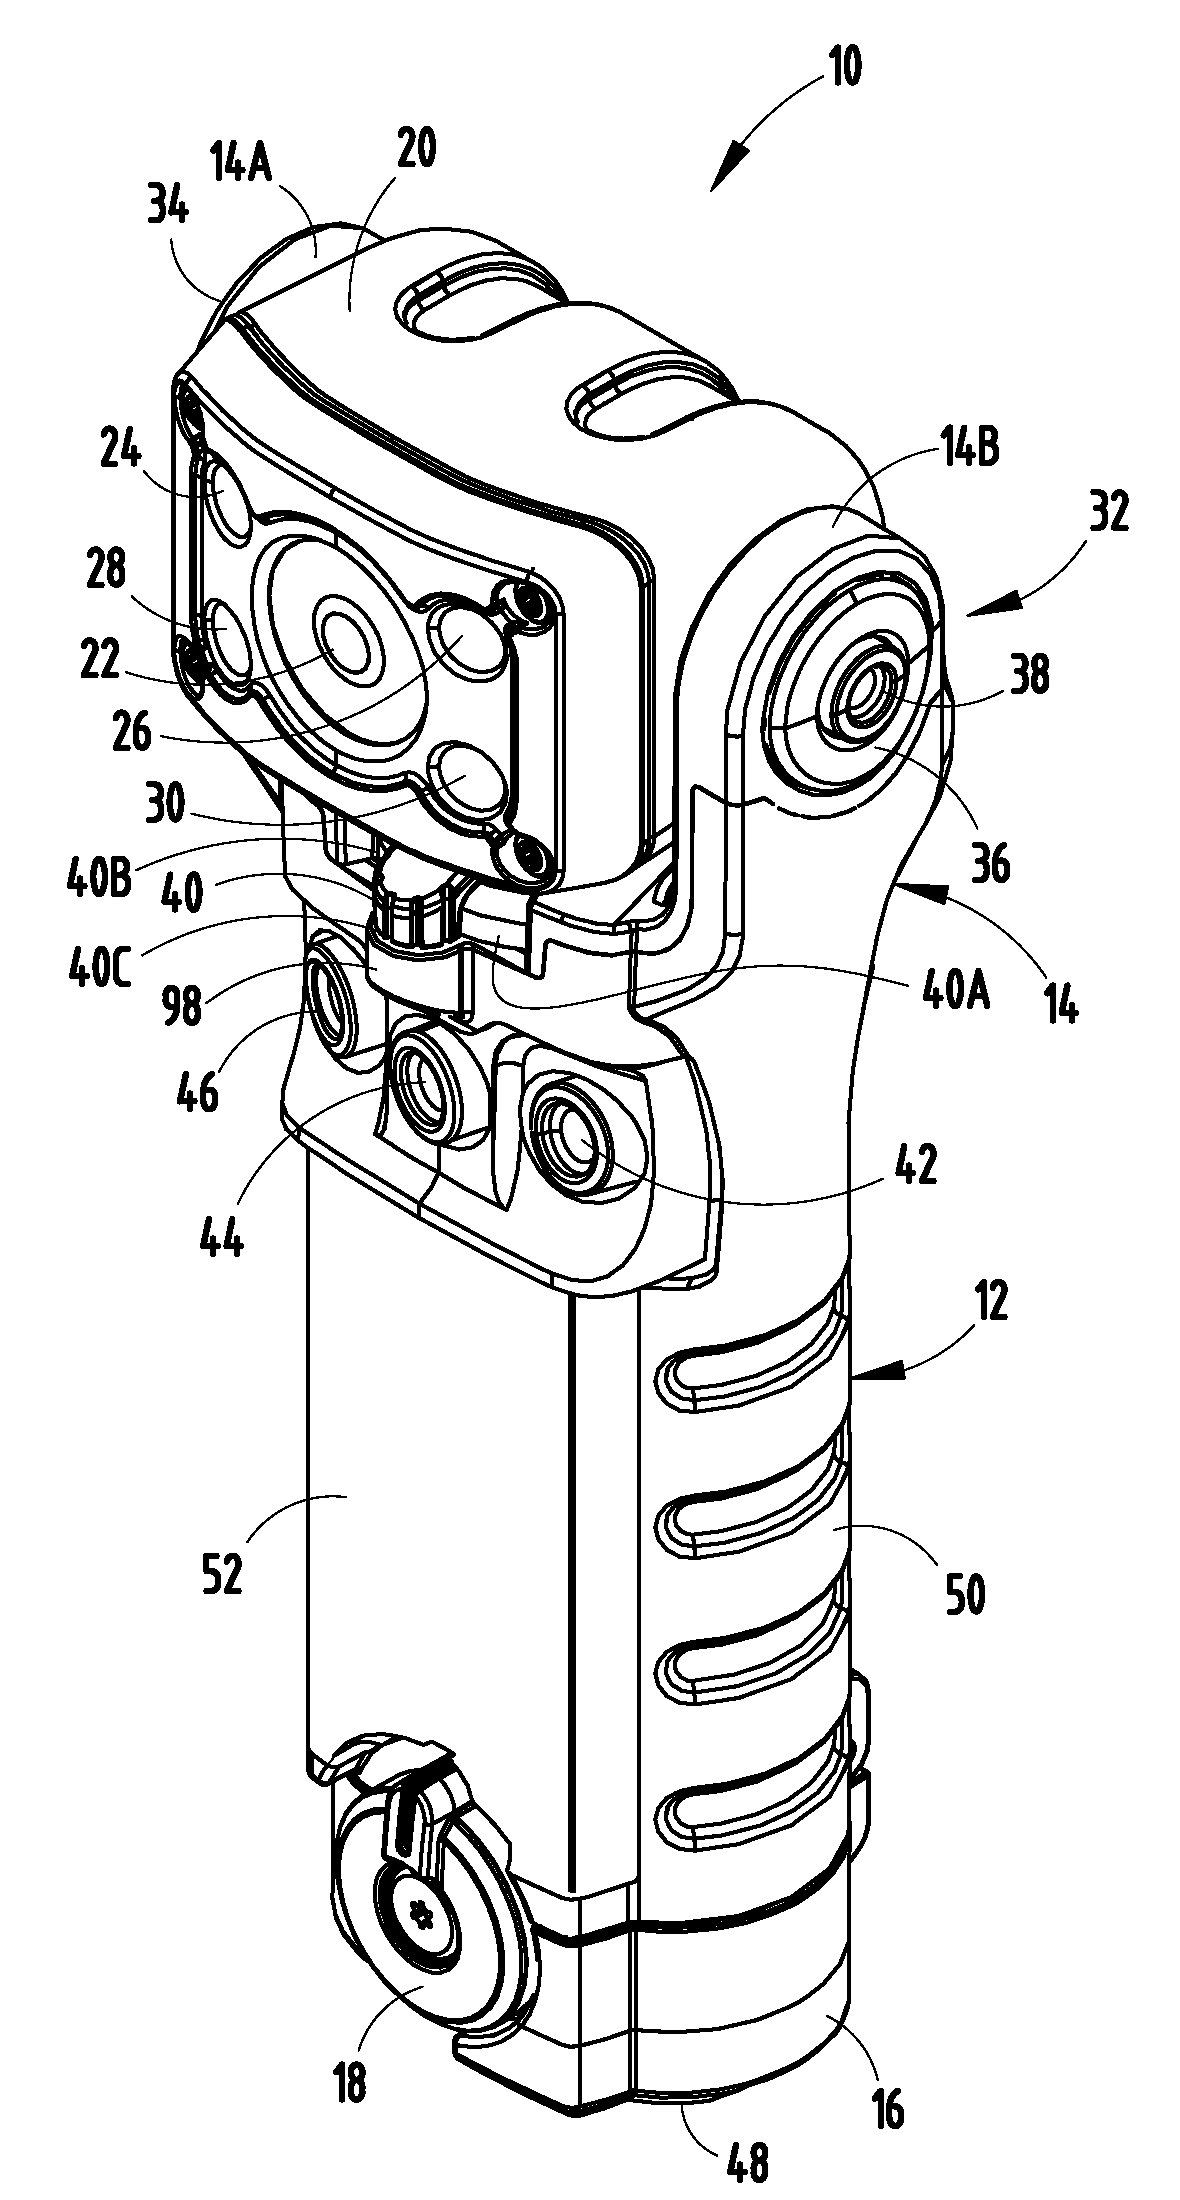 Lighting Device Configured to Operate with Different Batteries